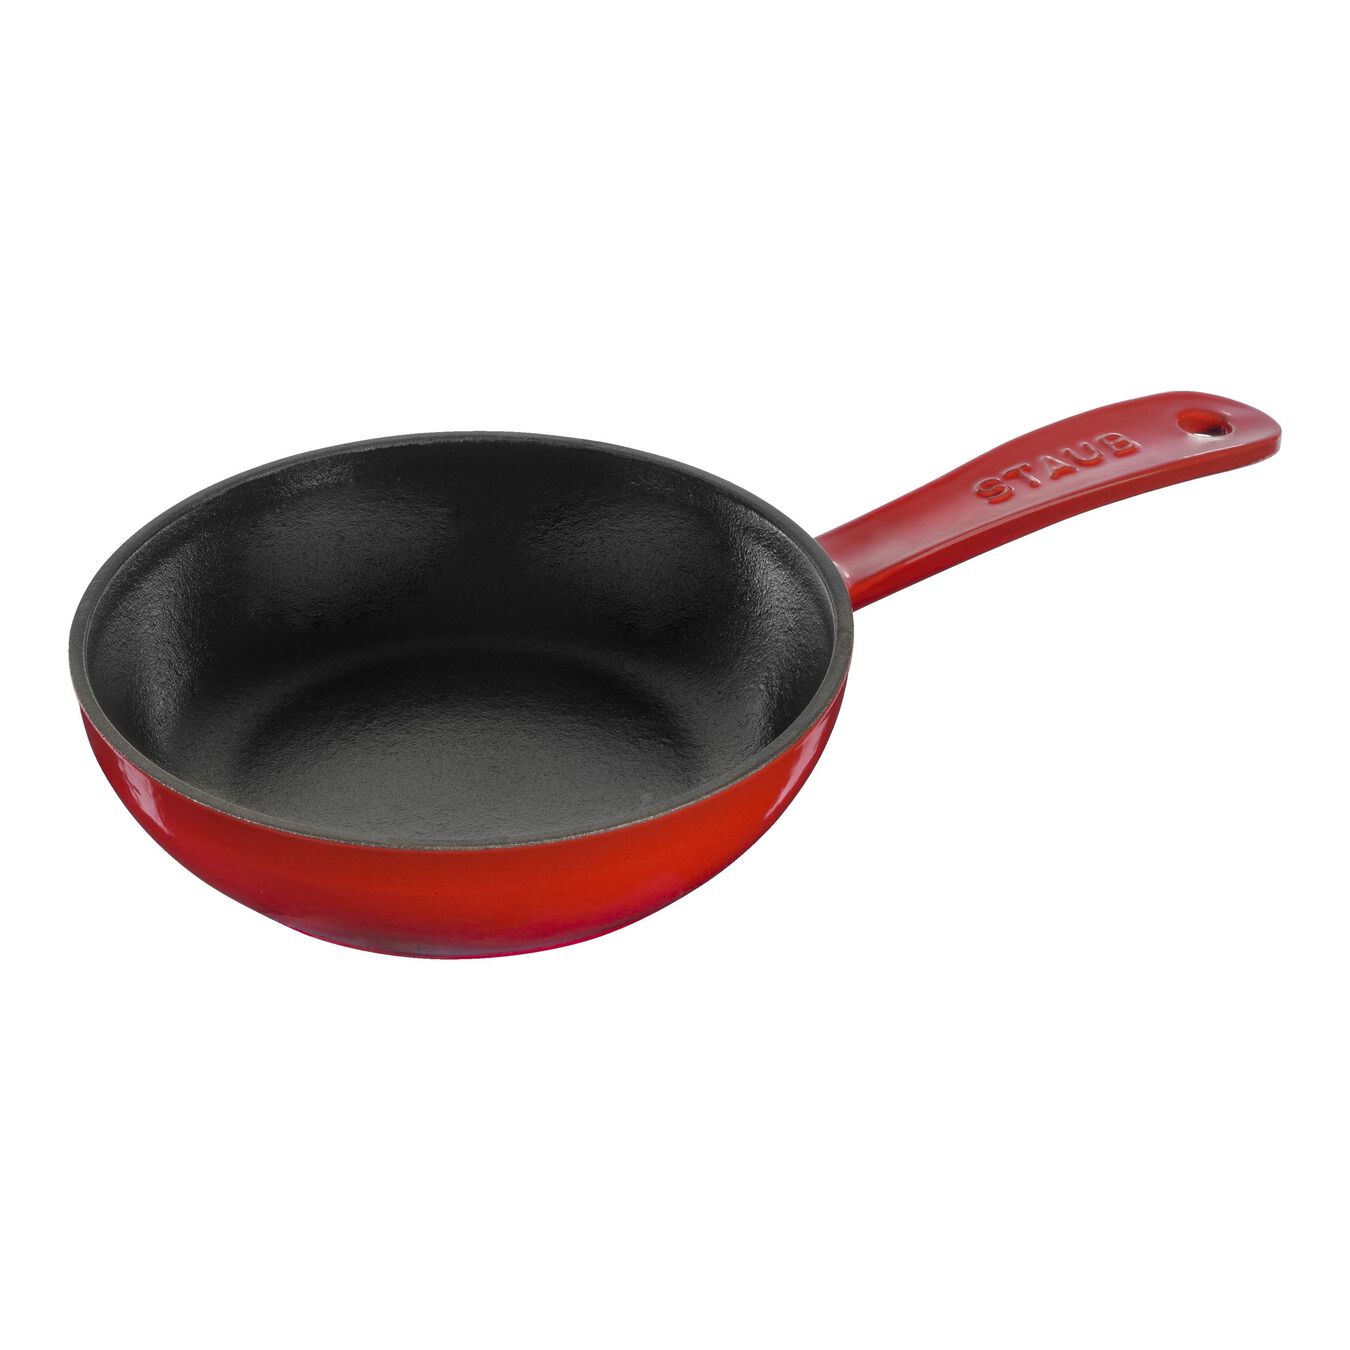 16 cm / 6.5 inch cast iron Frying pan, cherry - Visual Imperfections,,large 1